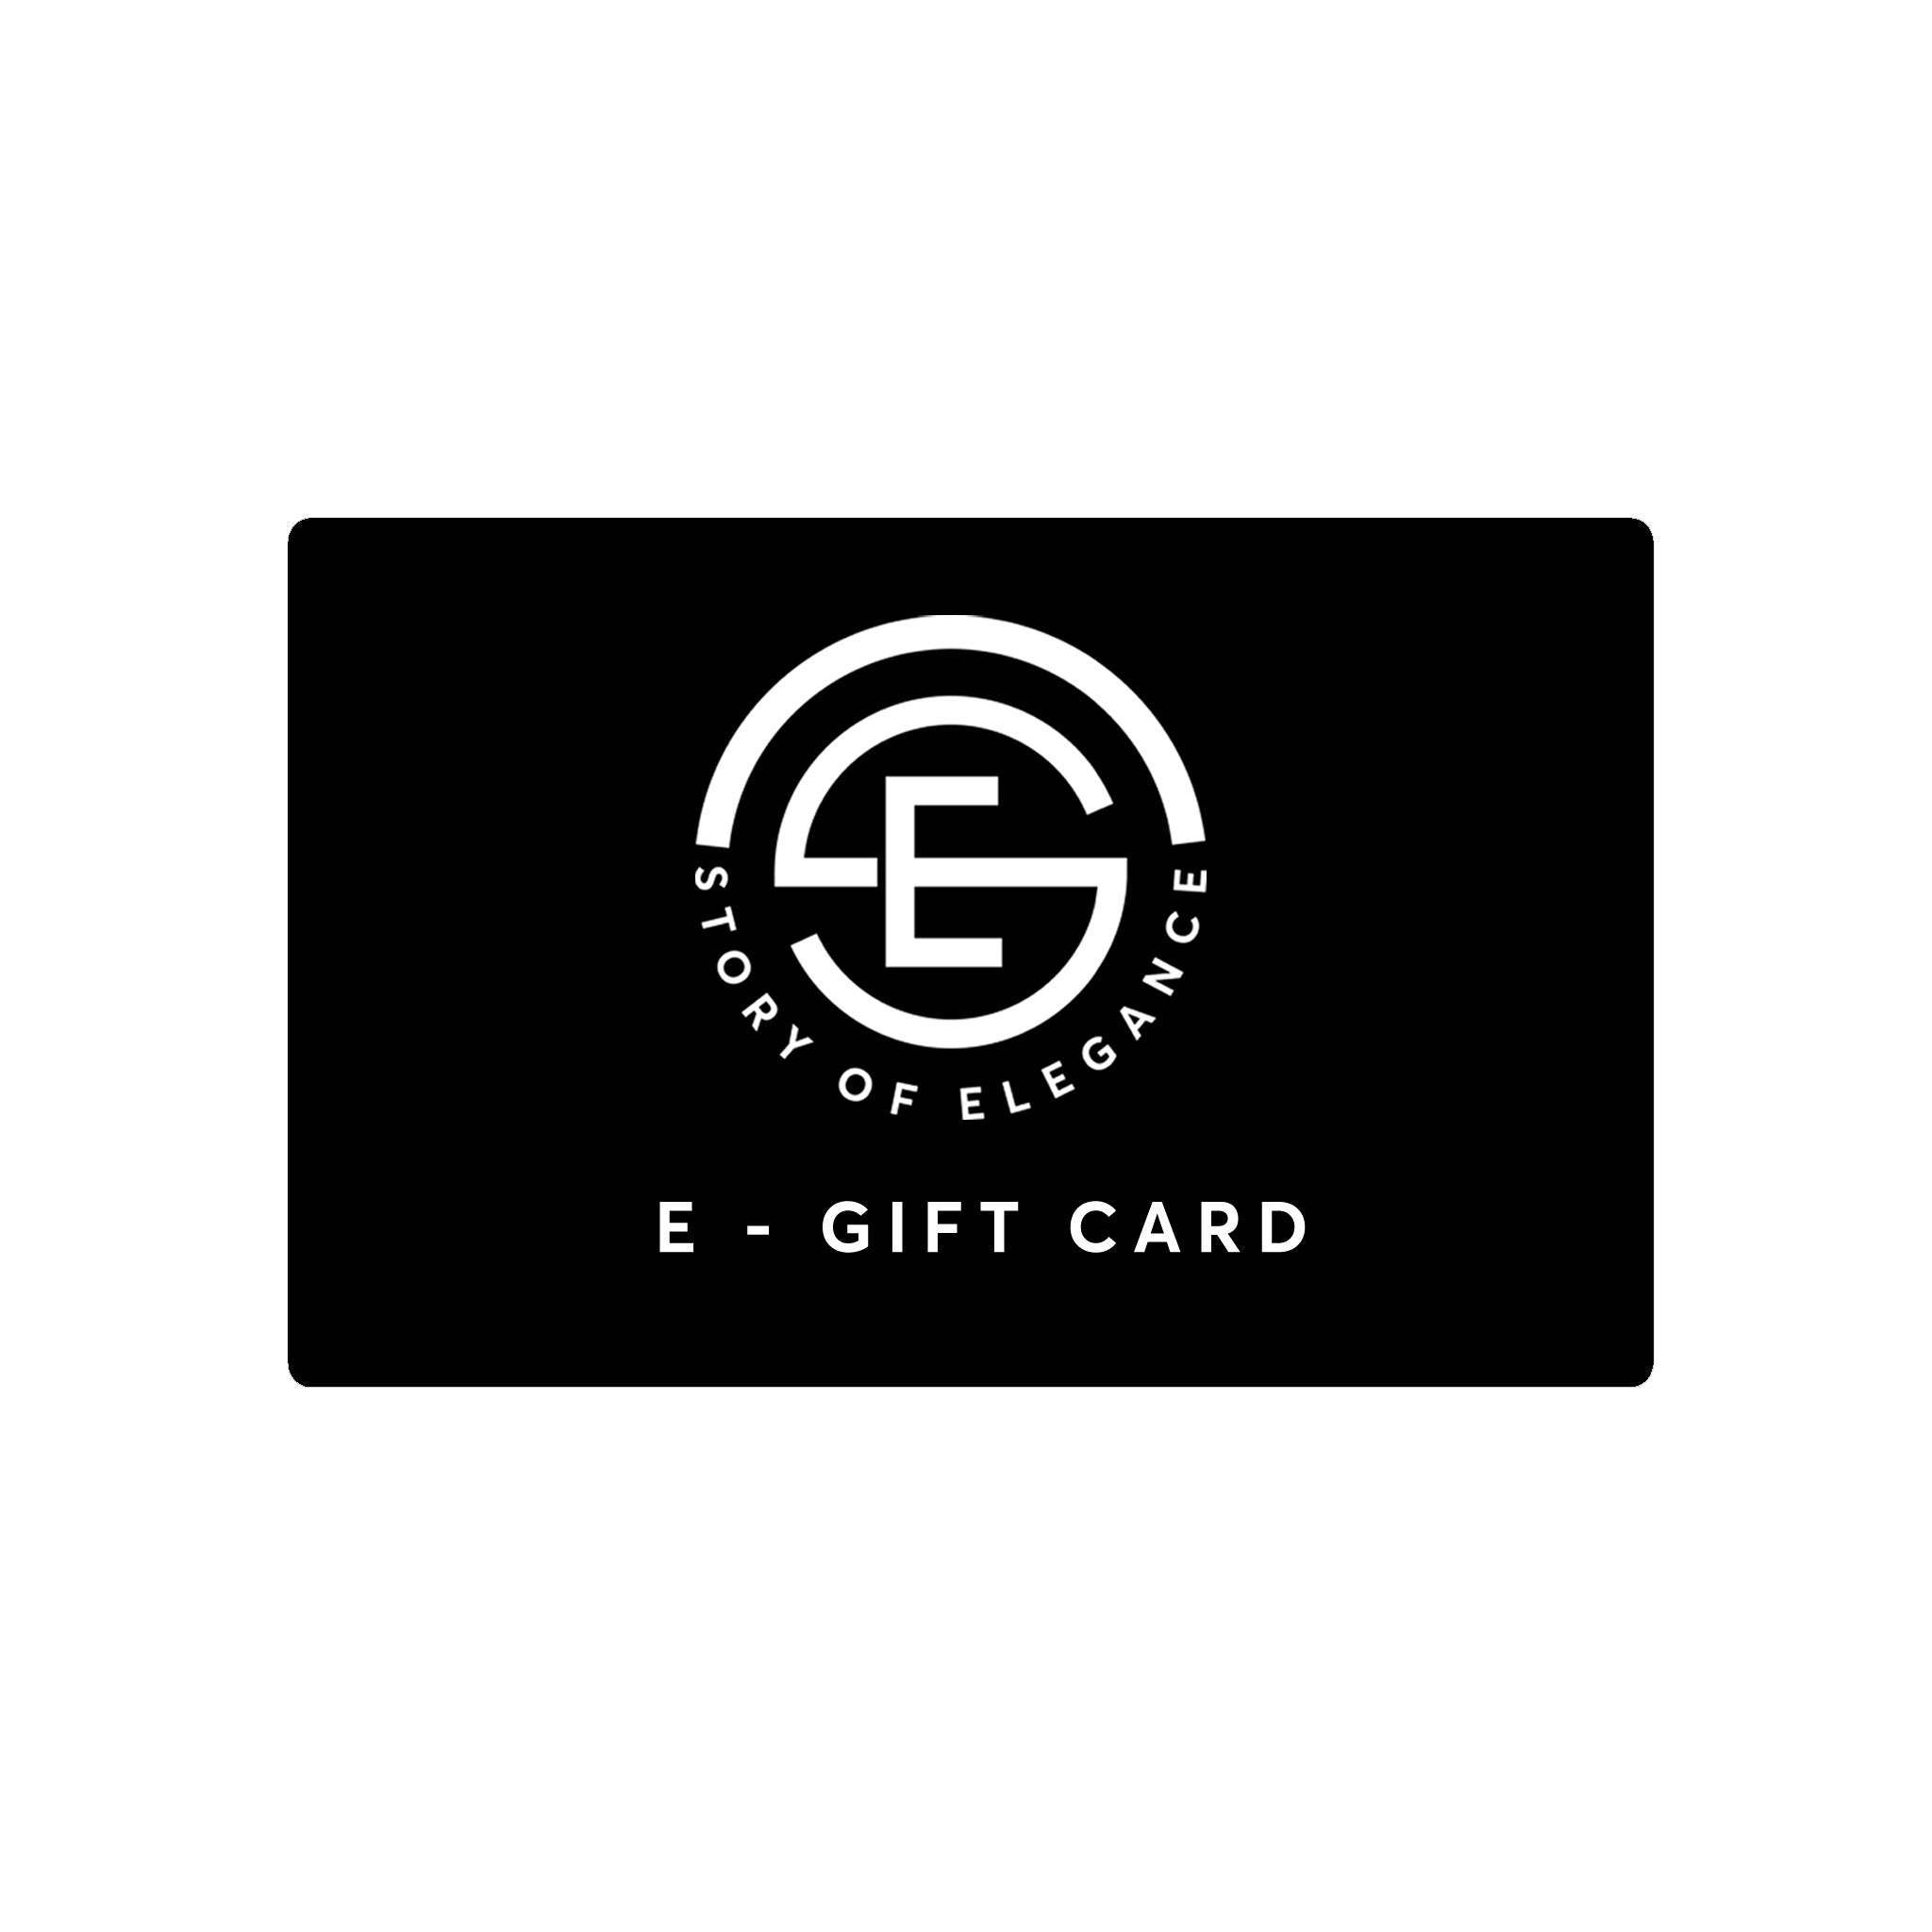 E - Gift Card, Front -Story of Elegance